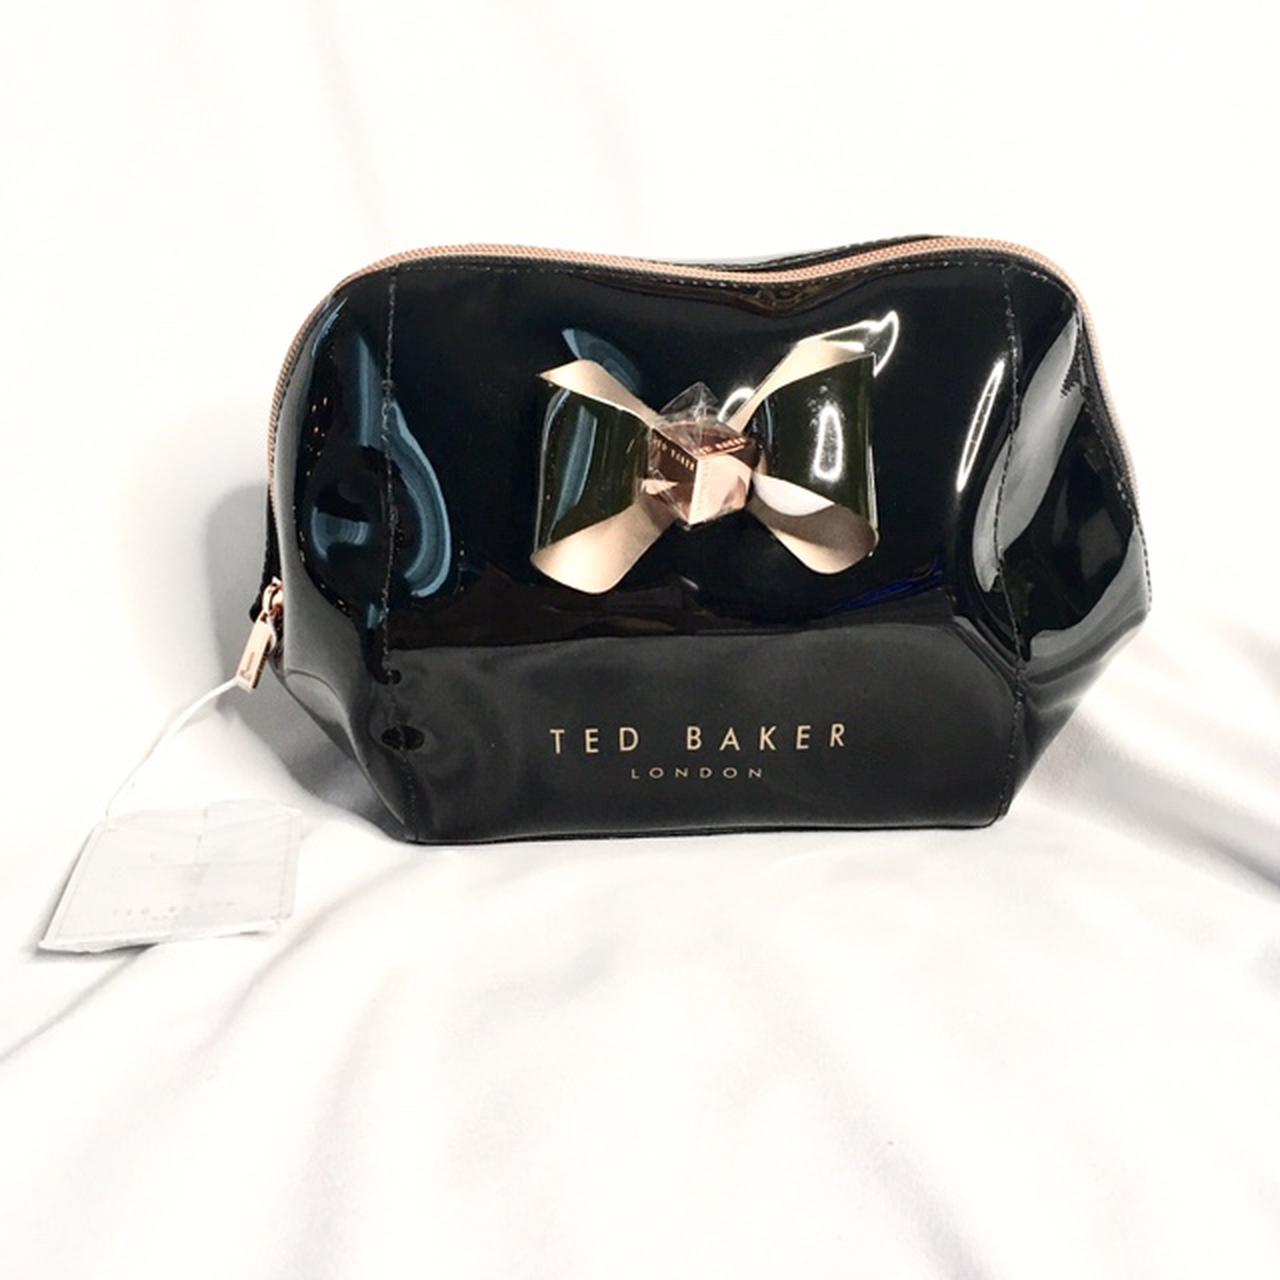 Bags, Ted Baker Rose Gold Clutch Nwt